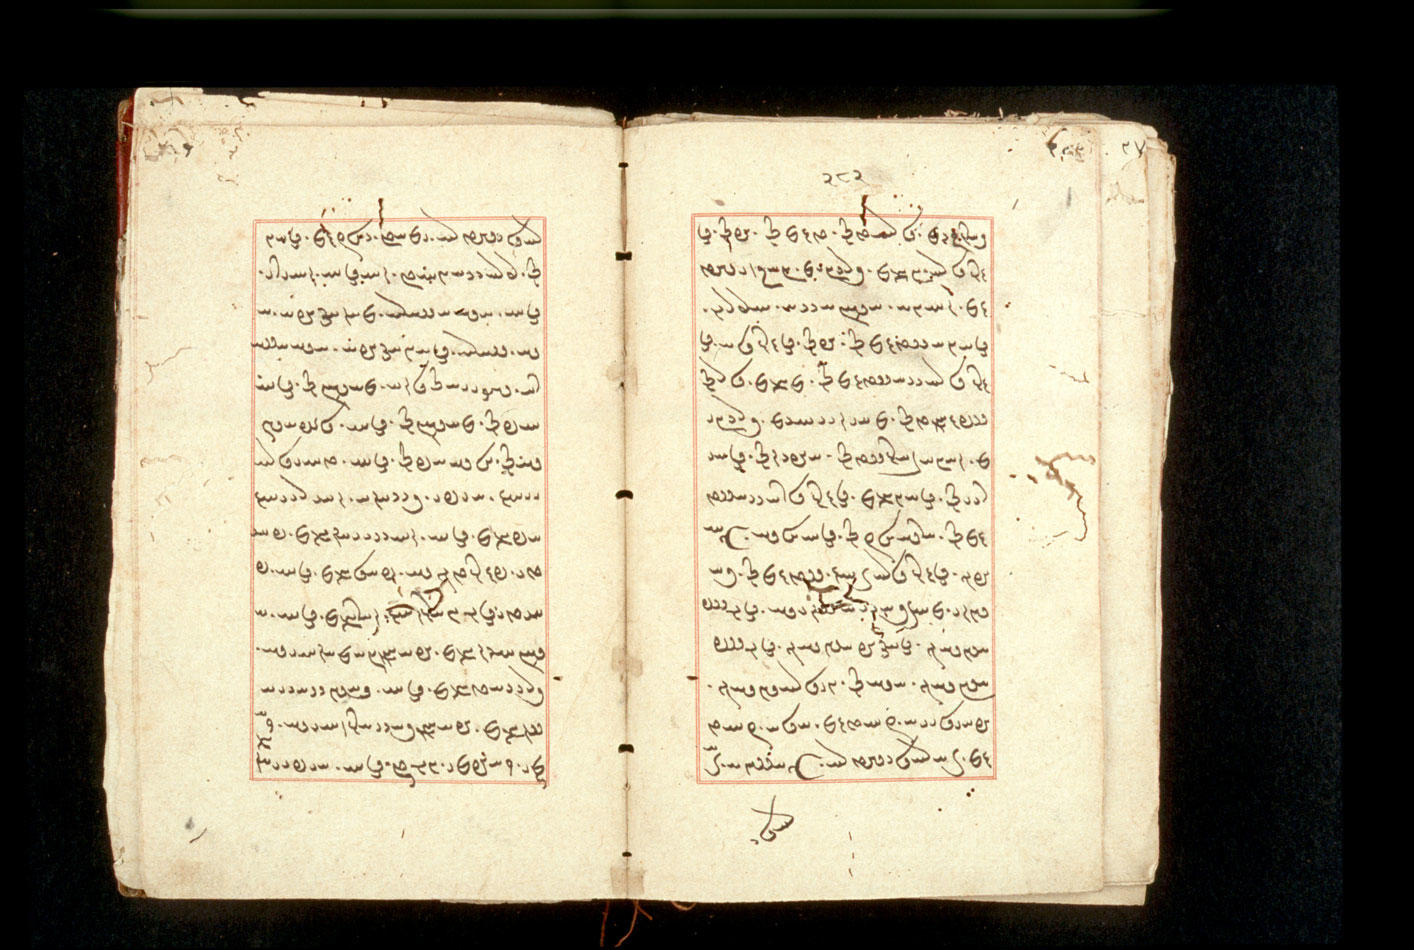 Folios 282v (right) and 283r (left)